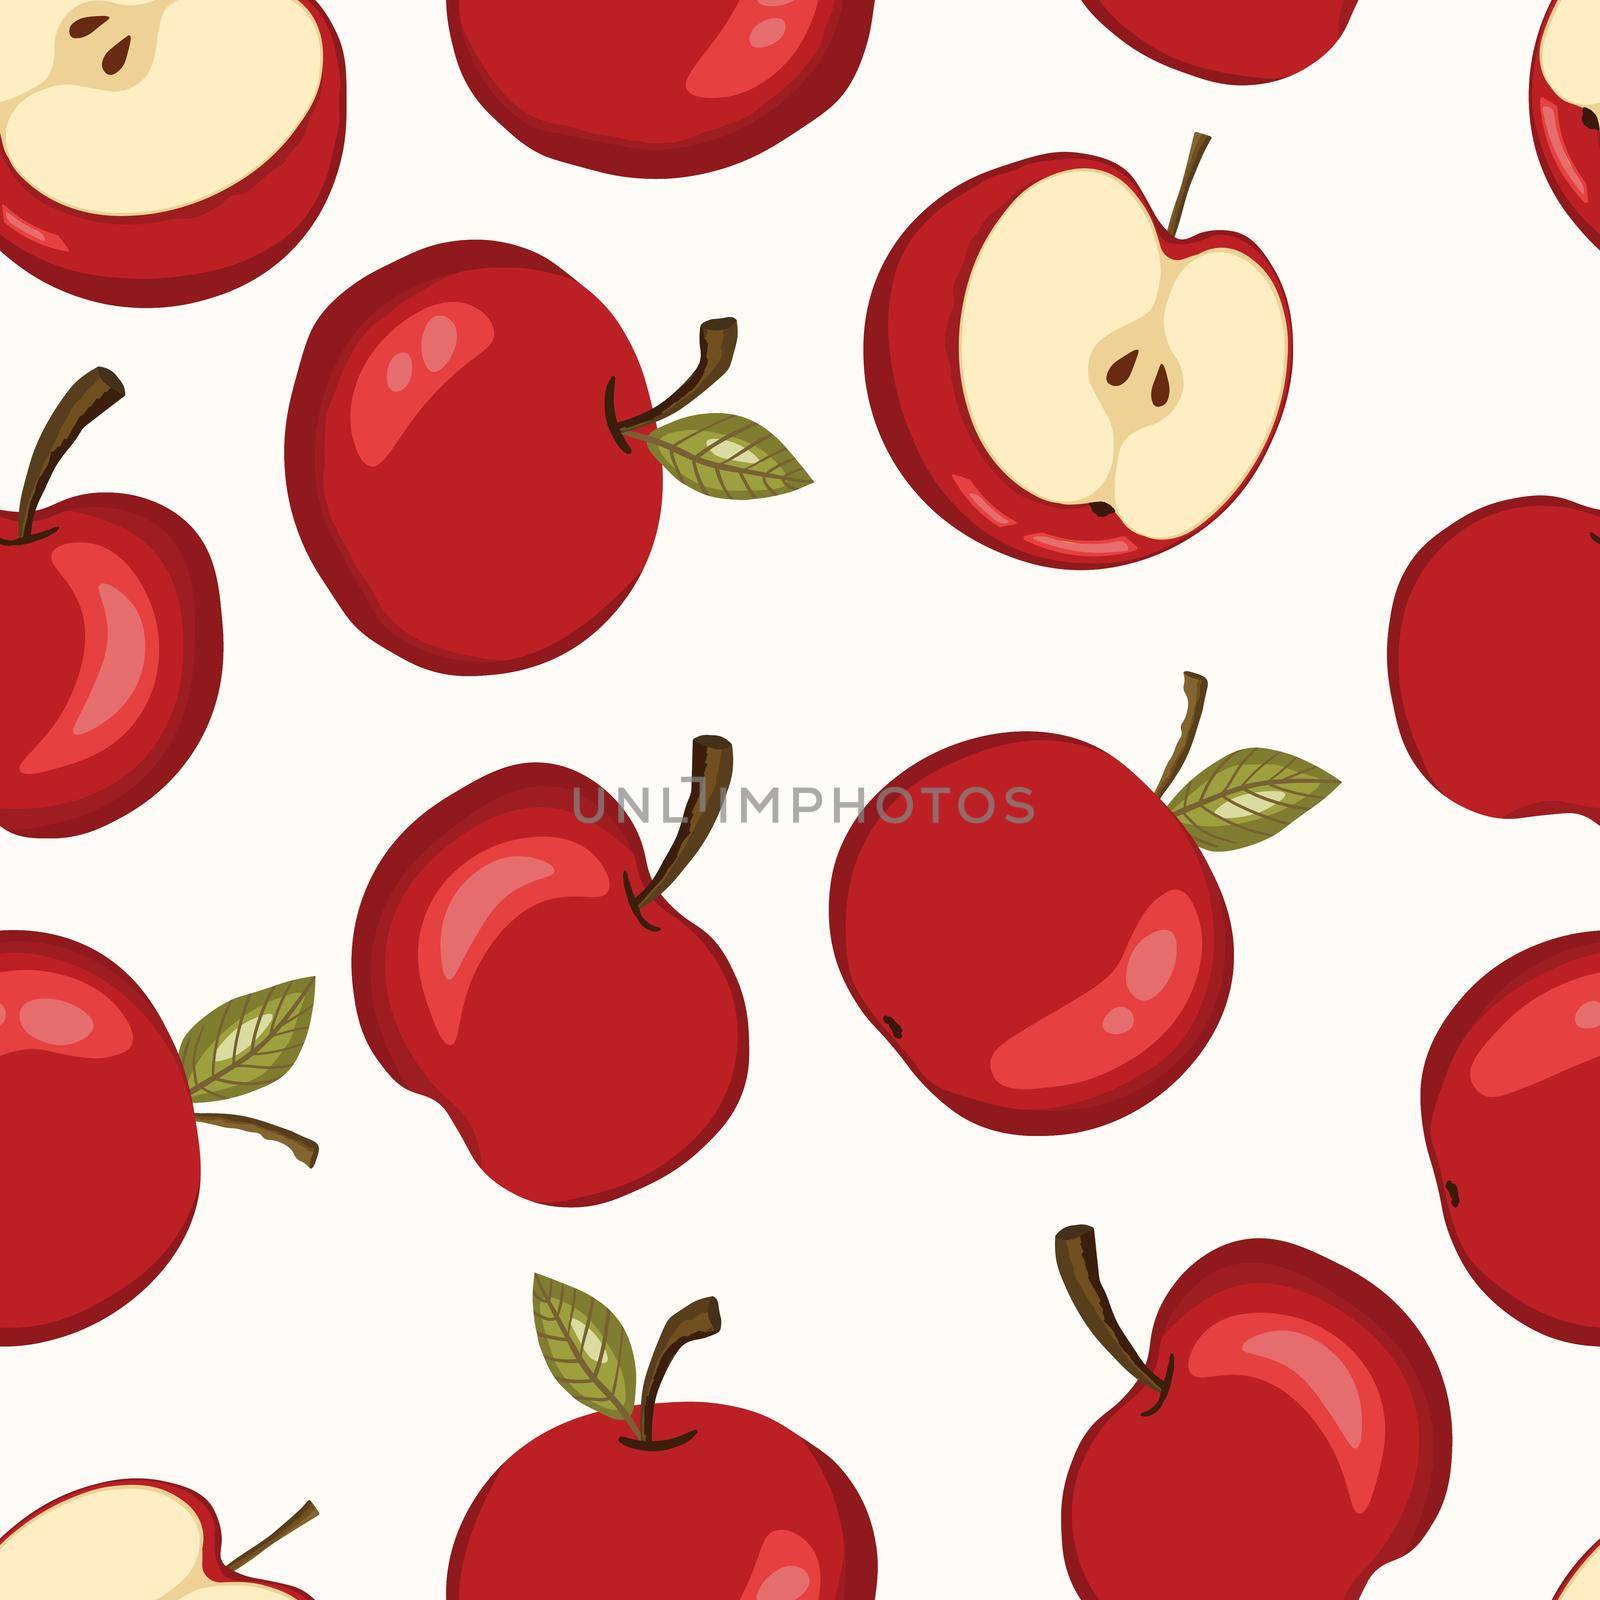 Seamless pattern with apple on white background. Natural delicious fresh ripe tasty fruit. Vector illustration for print, fabric, textile, banner, design. Stylized apples with leaves. Food concept.